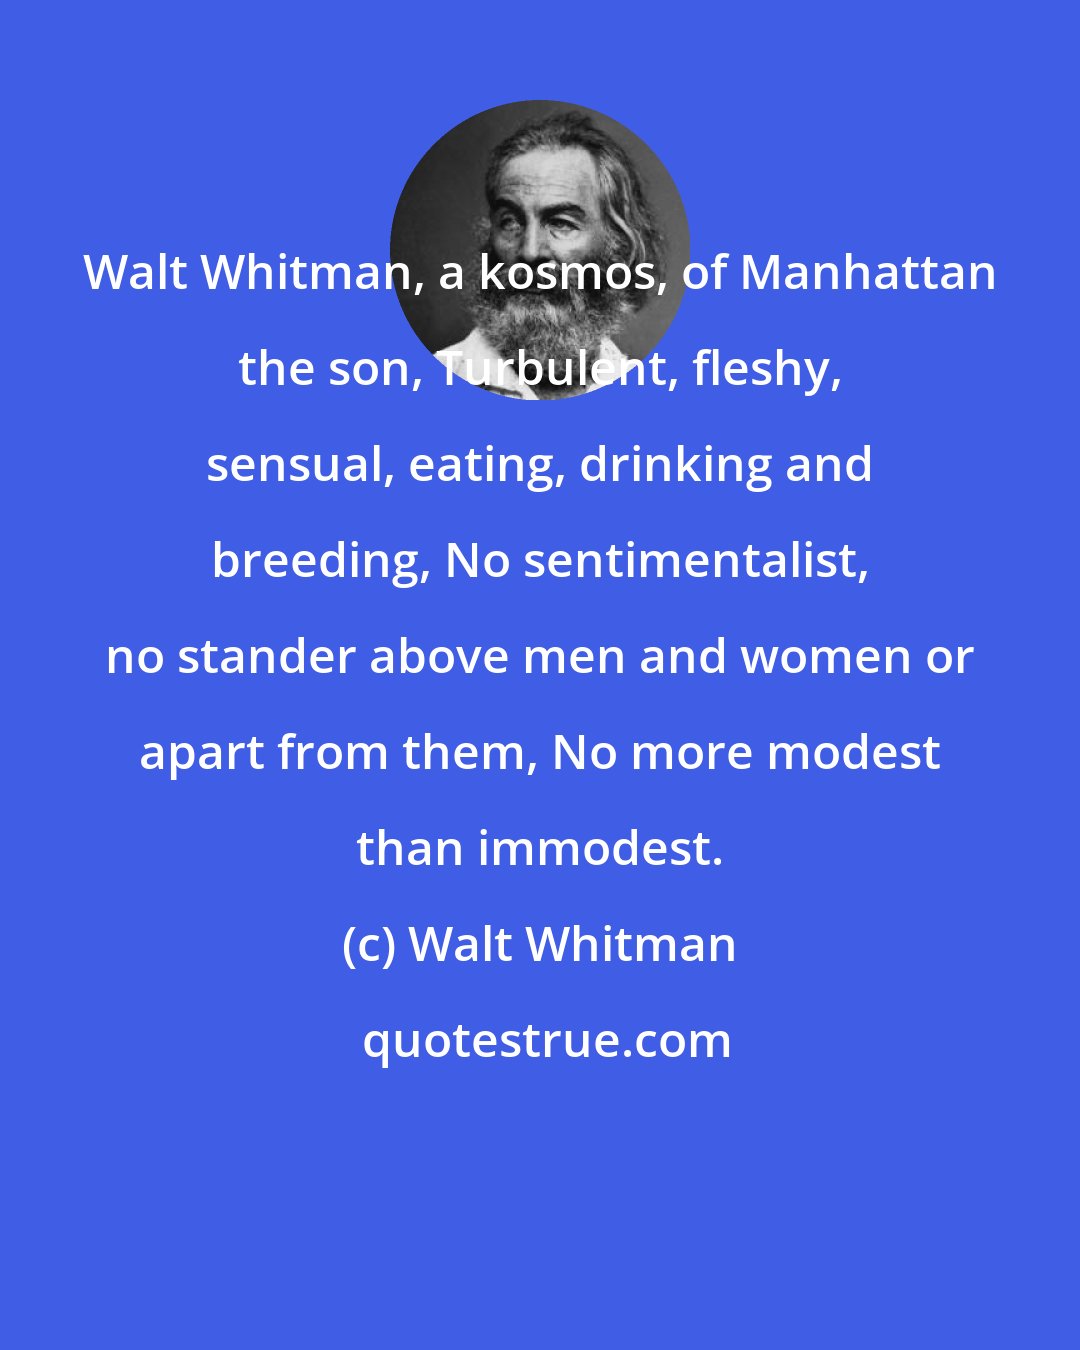 Walt Whitman: Walt Whitman, a kosmos, of Manhattan the son, Turbulent, fleshy, sensual, eating, drinking and breeding, No sentimentalist, no stander above men and women or apart from them, No more modest than immodest.